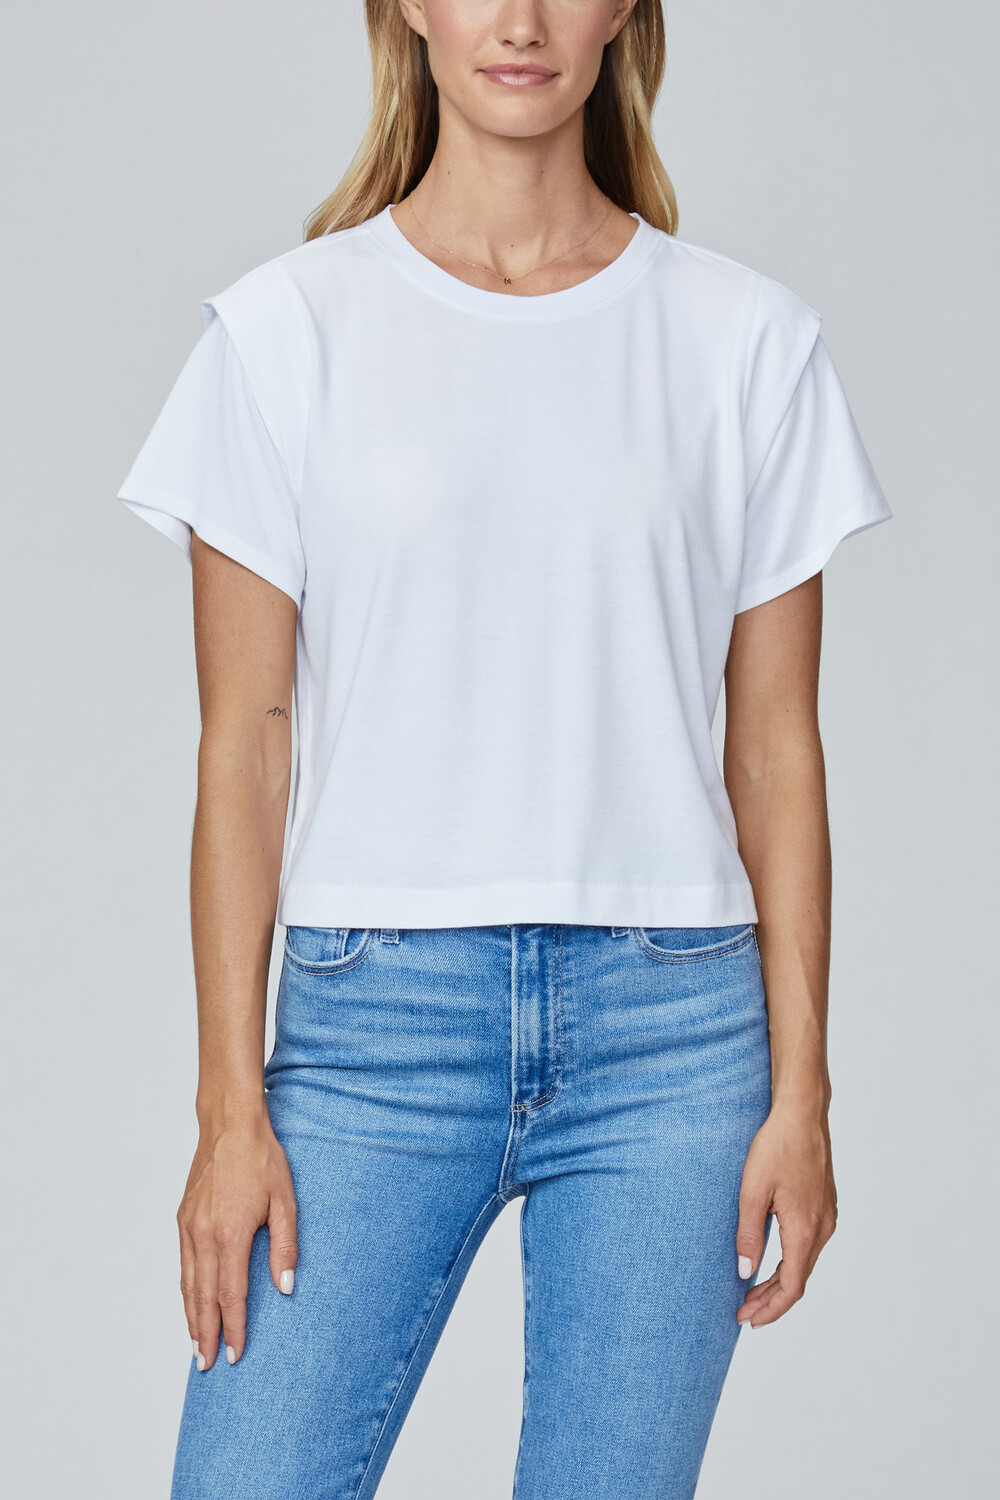 Paige Sefa Tee in White